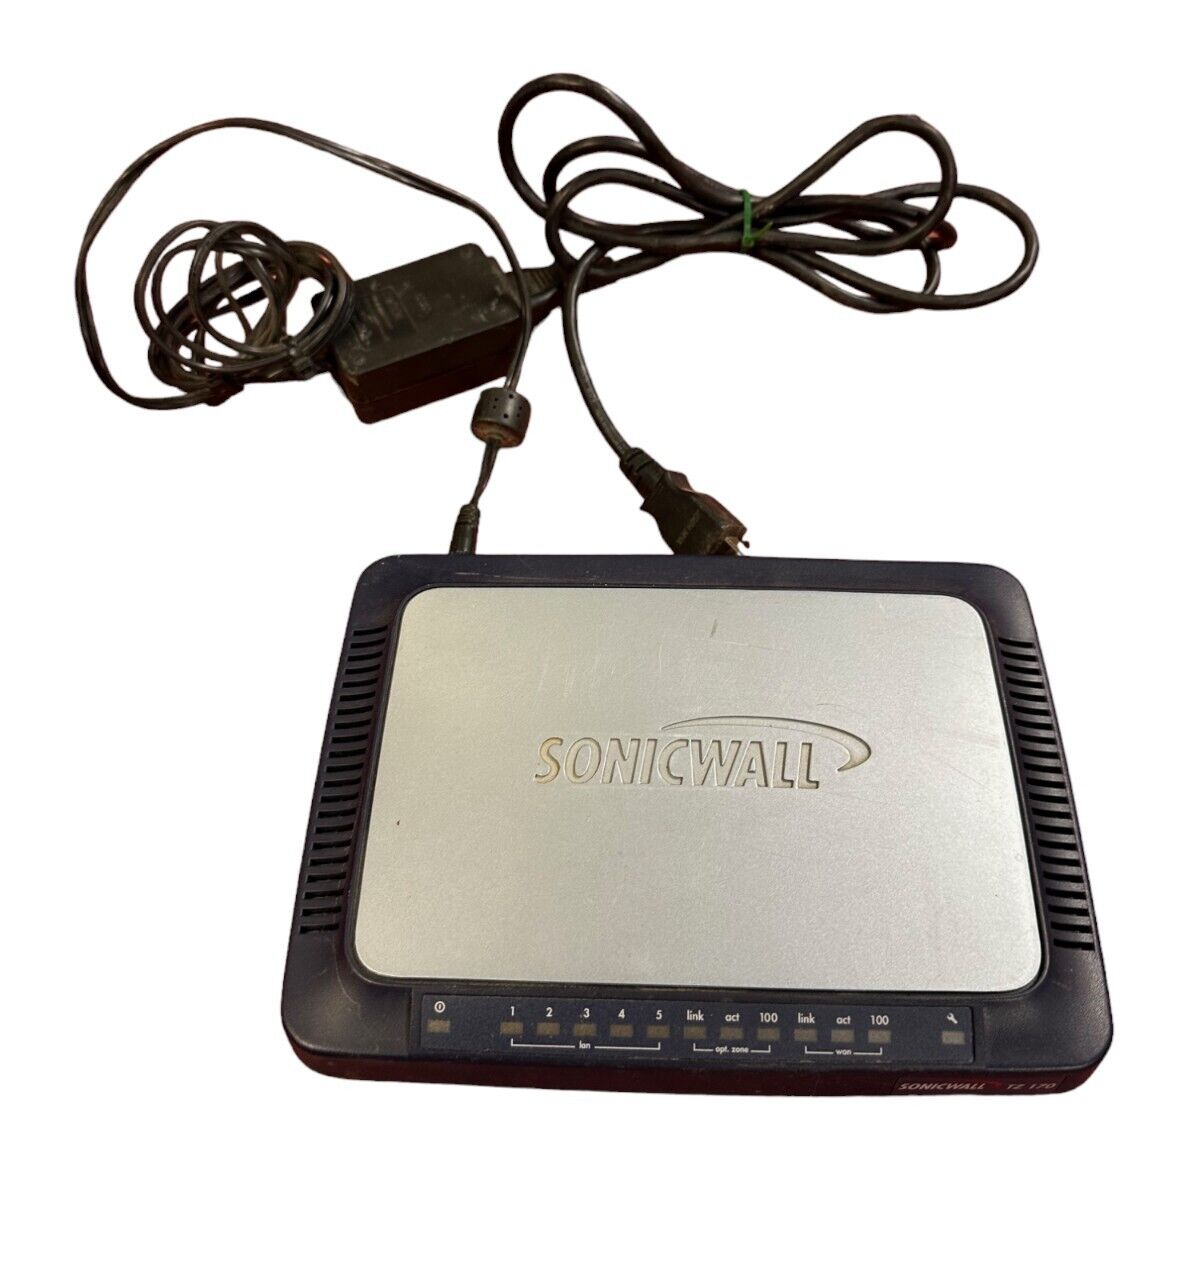 SonicWALL TZ 170 10 Node, Firewall Switch Security Appliance APL11-029 **SALE**